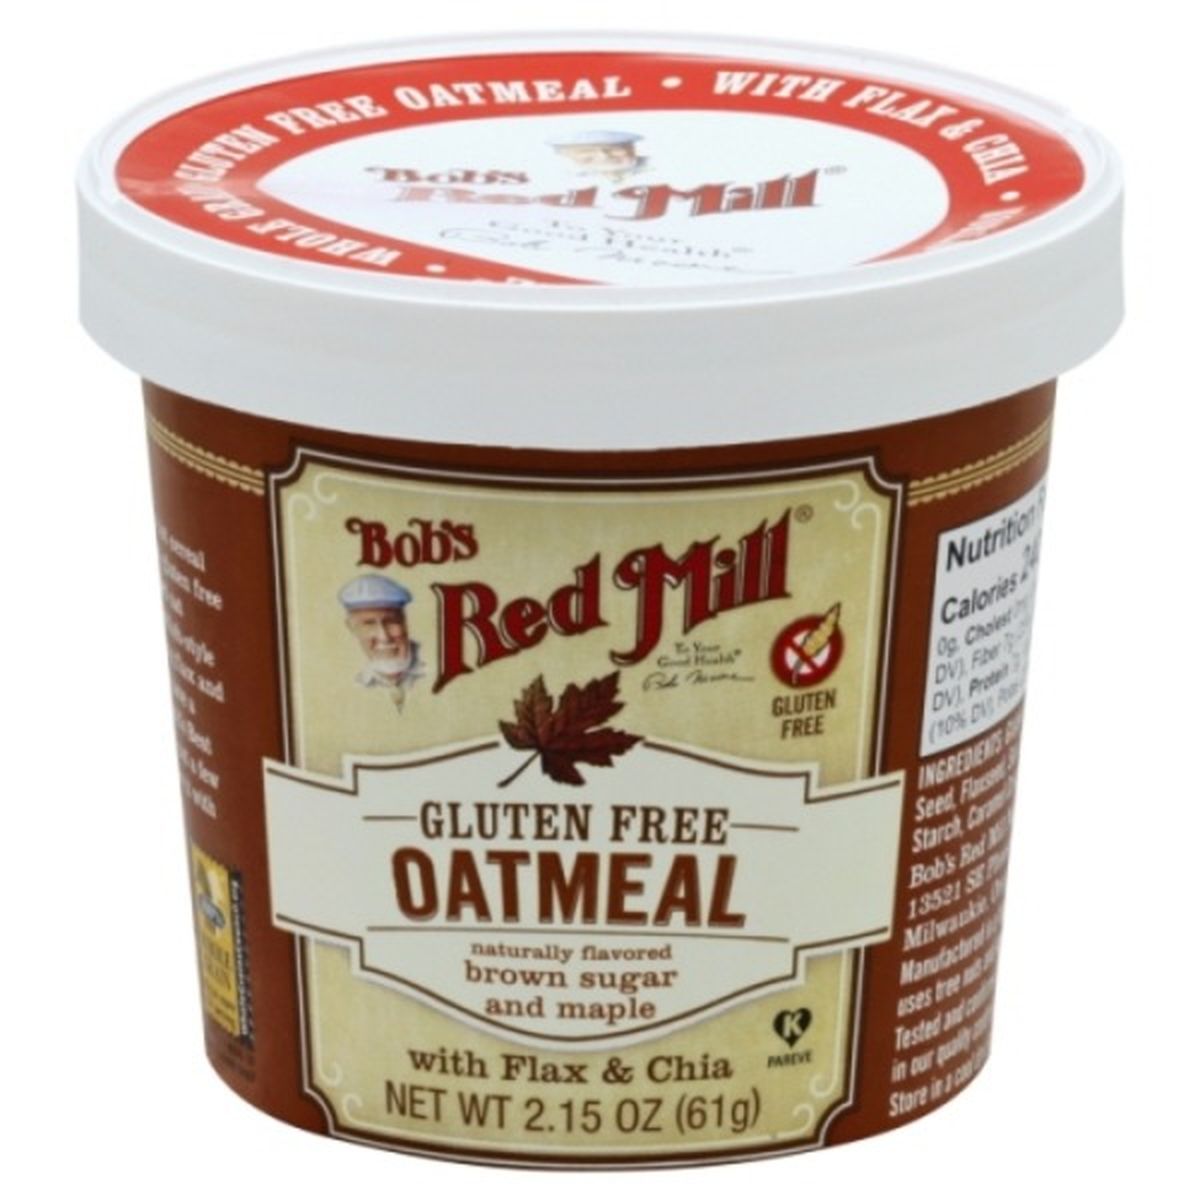 Calories in Bob's Red Mill Oatmeal, Gluten Free, Brown Sugar and Maple